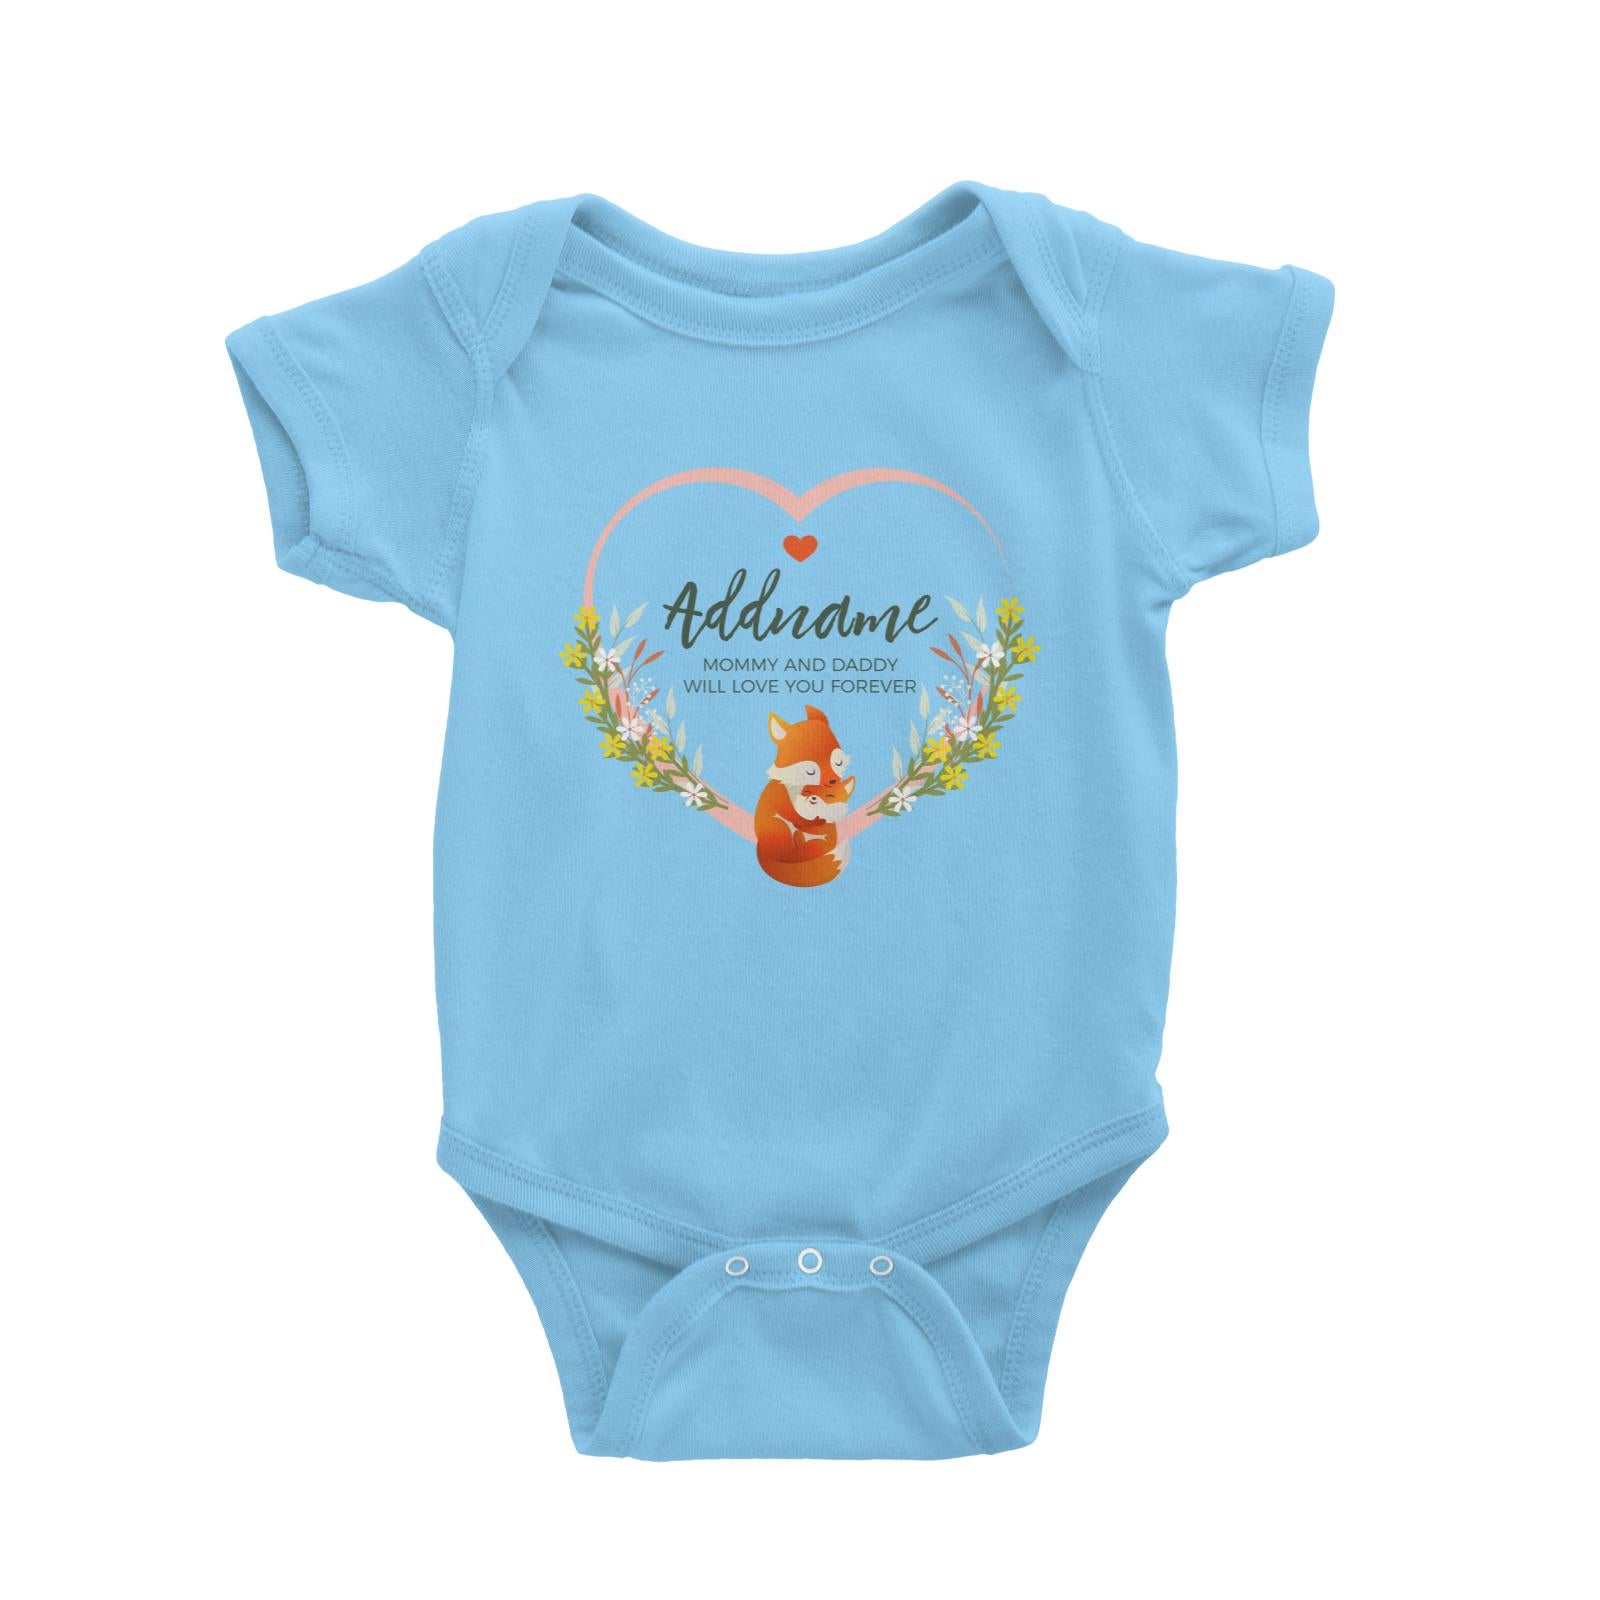 Loving Mother and Baby Fox in Heart Personalizable with Name and Text Baby Romper